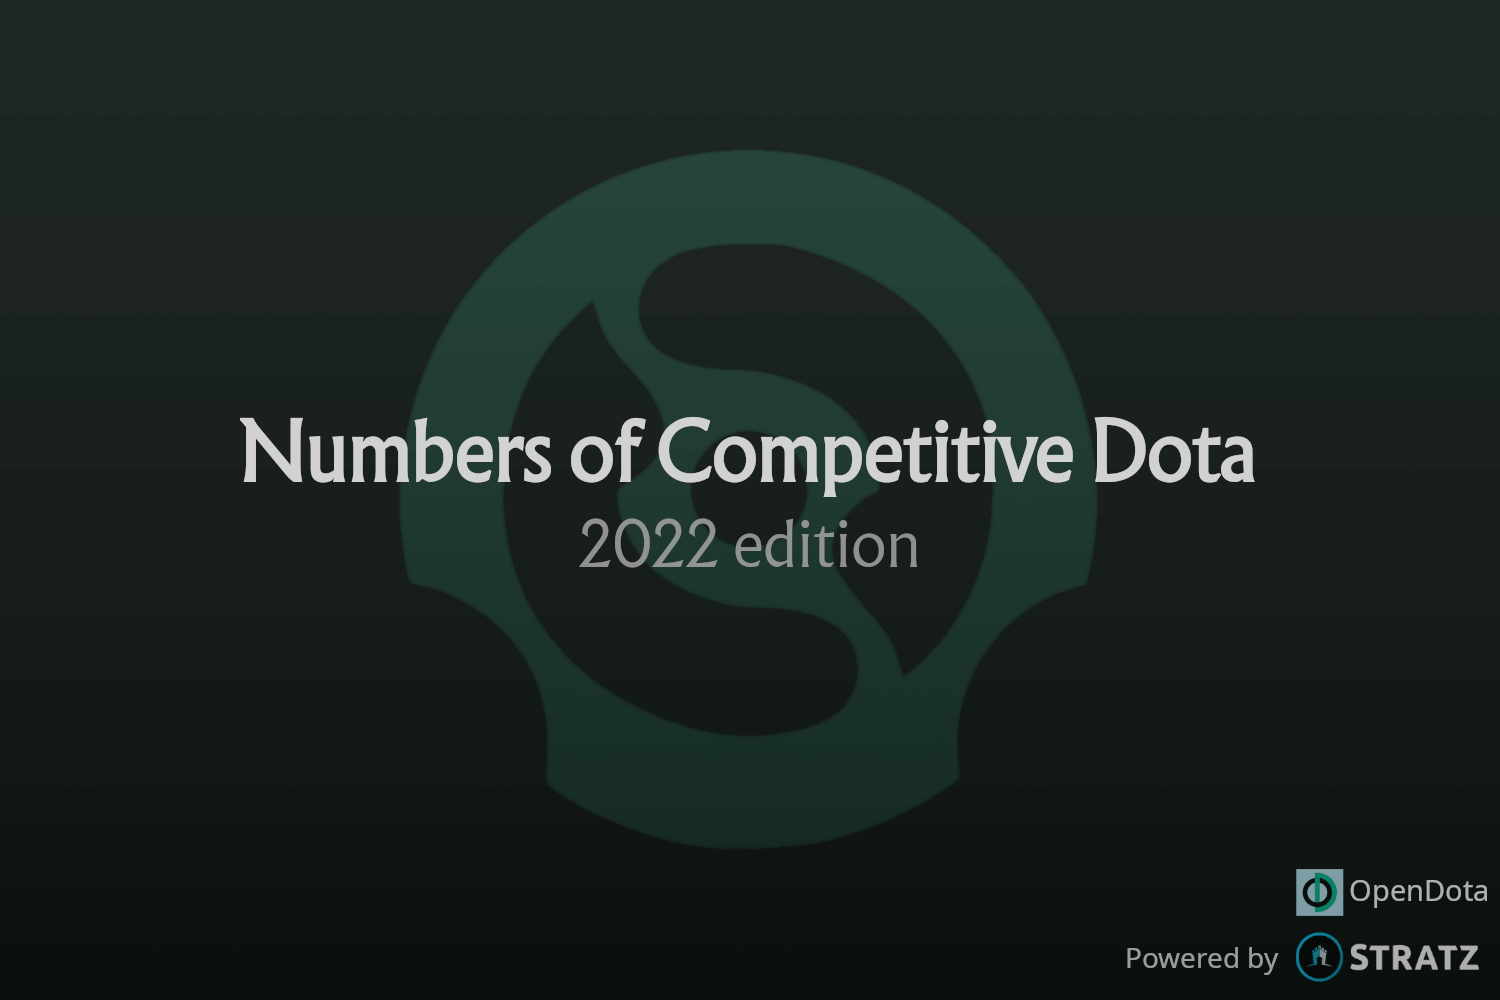 Numbers of Competitive Dota: 2022 Edition